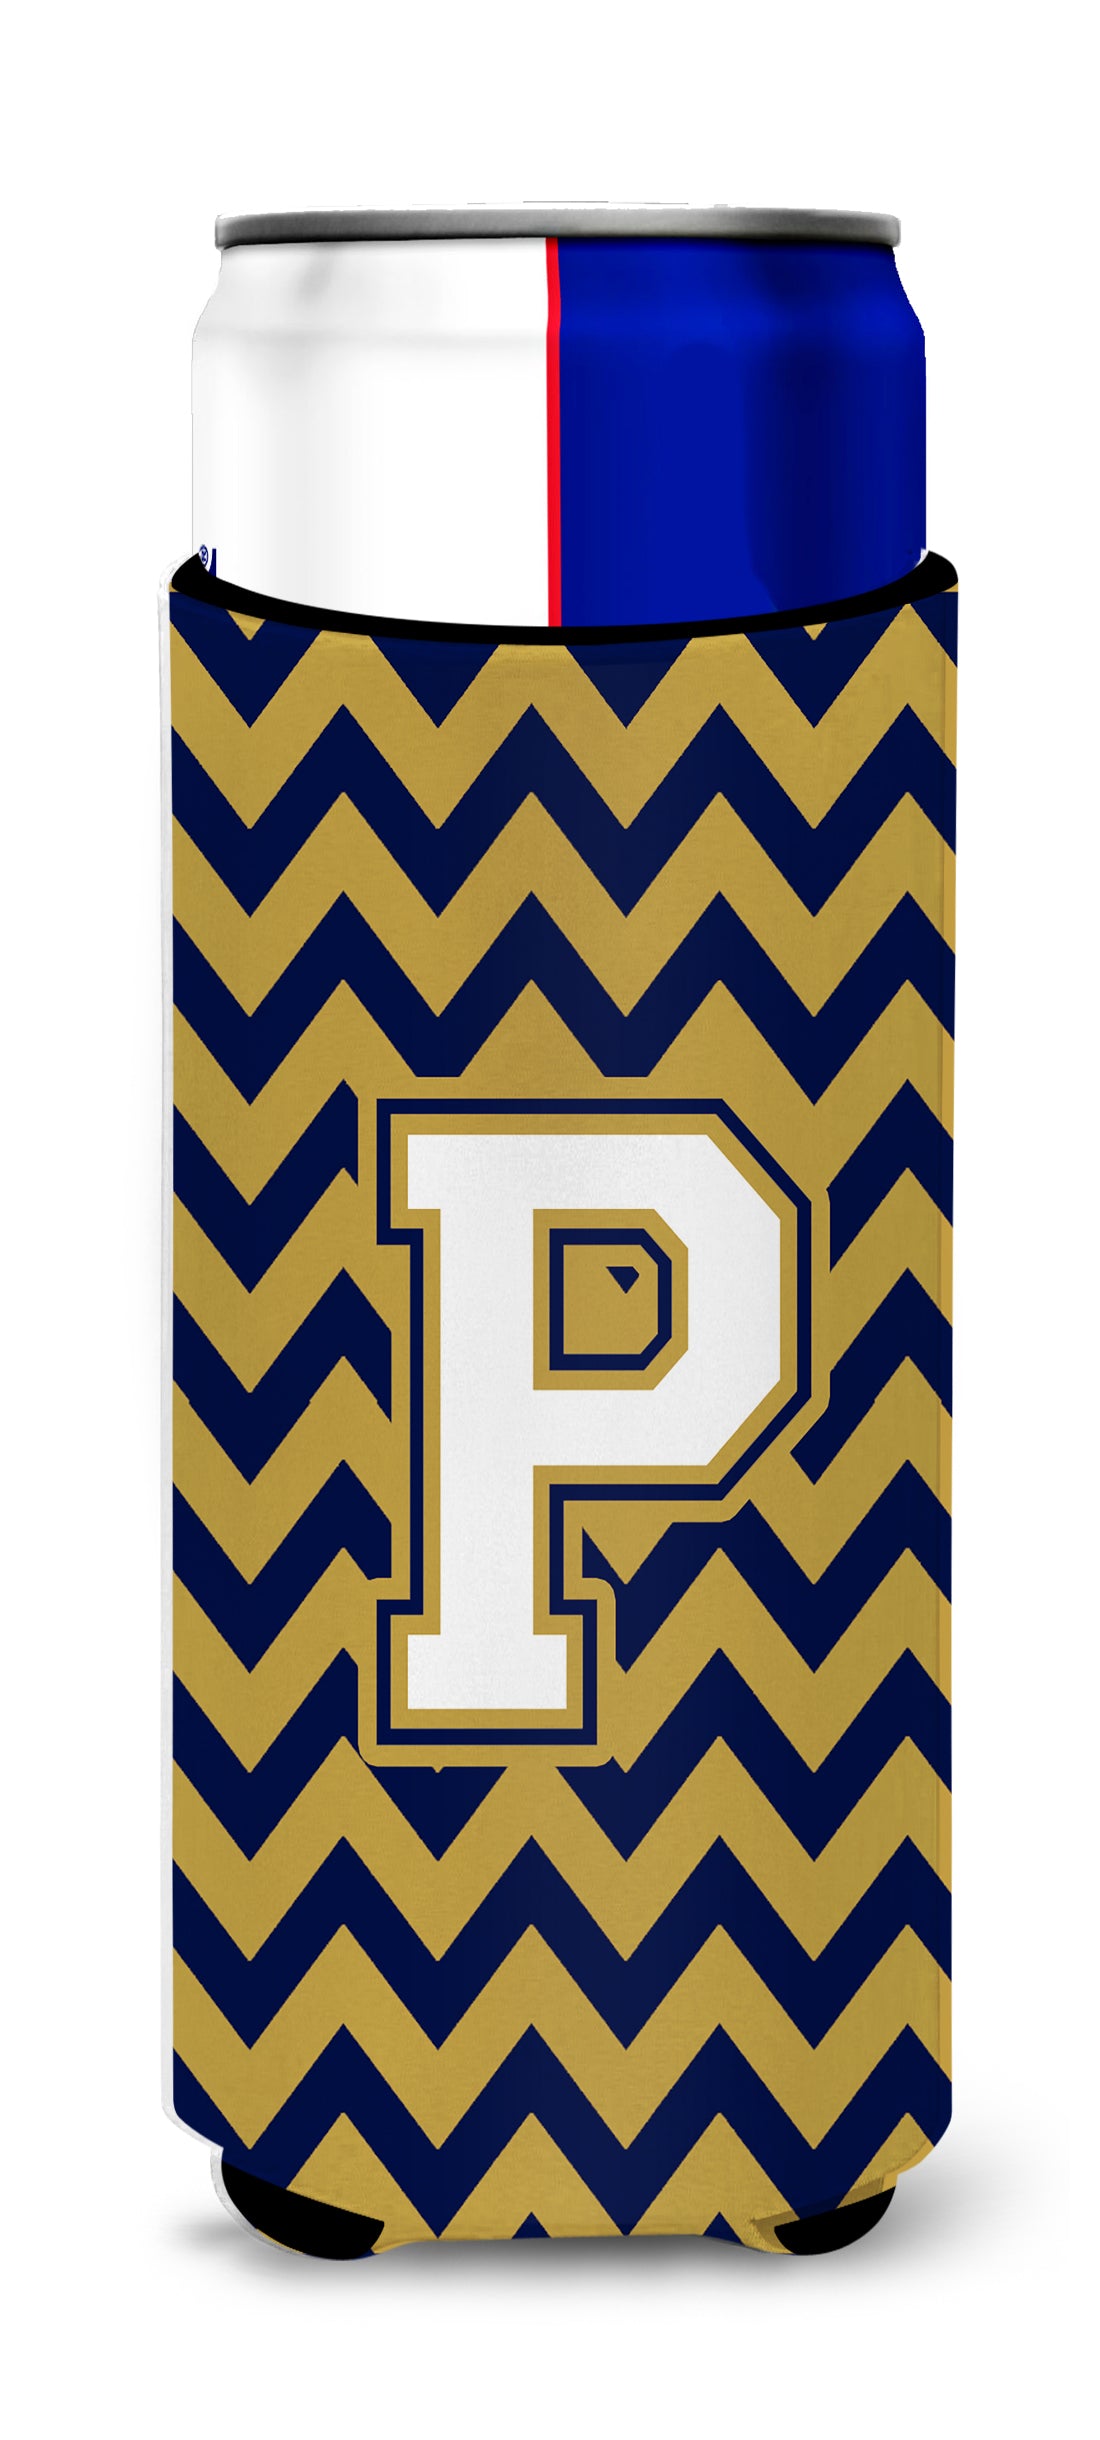 Letter P Chevron Navy Blue and Gold Ultra Beverage Insulators for slim cans CJ1057-PMUK.